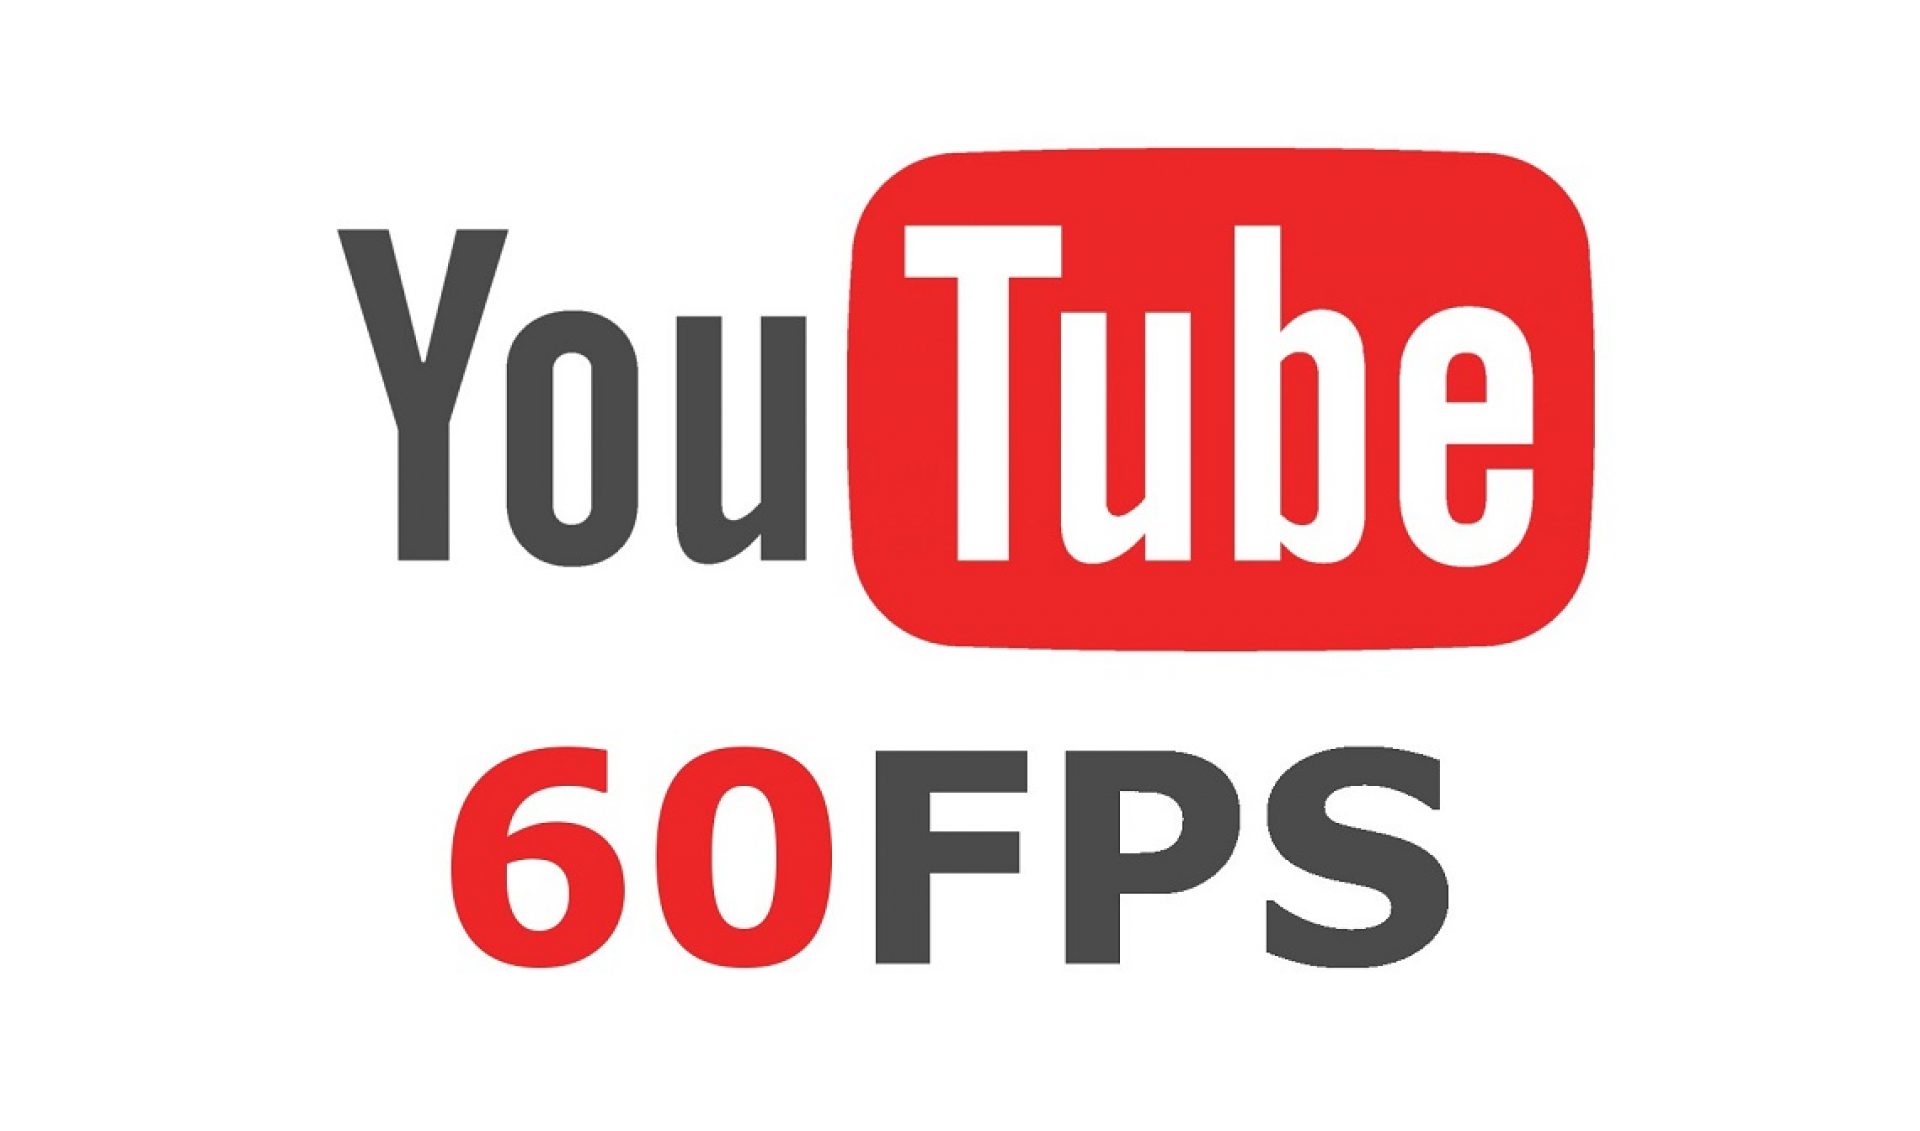 YouTube’s iOS, Android Apps Now Support 60 FPS Playback